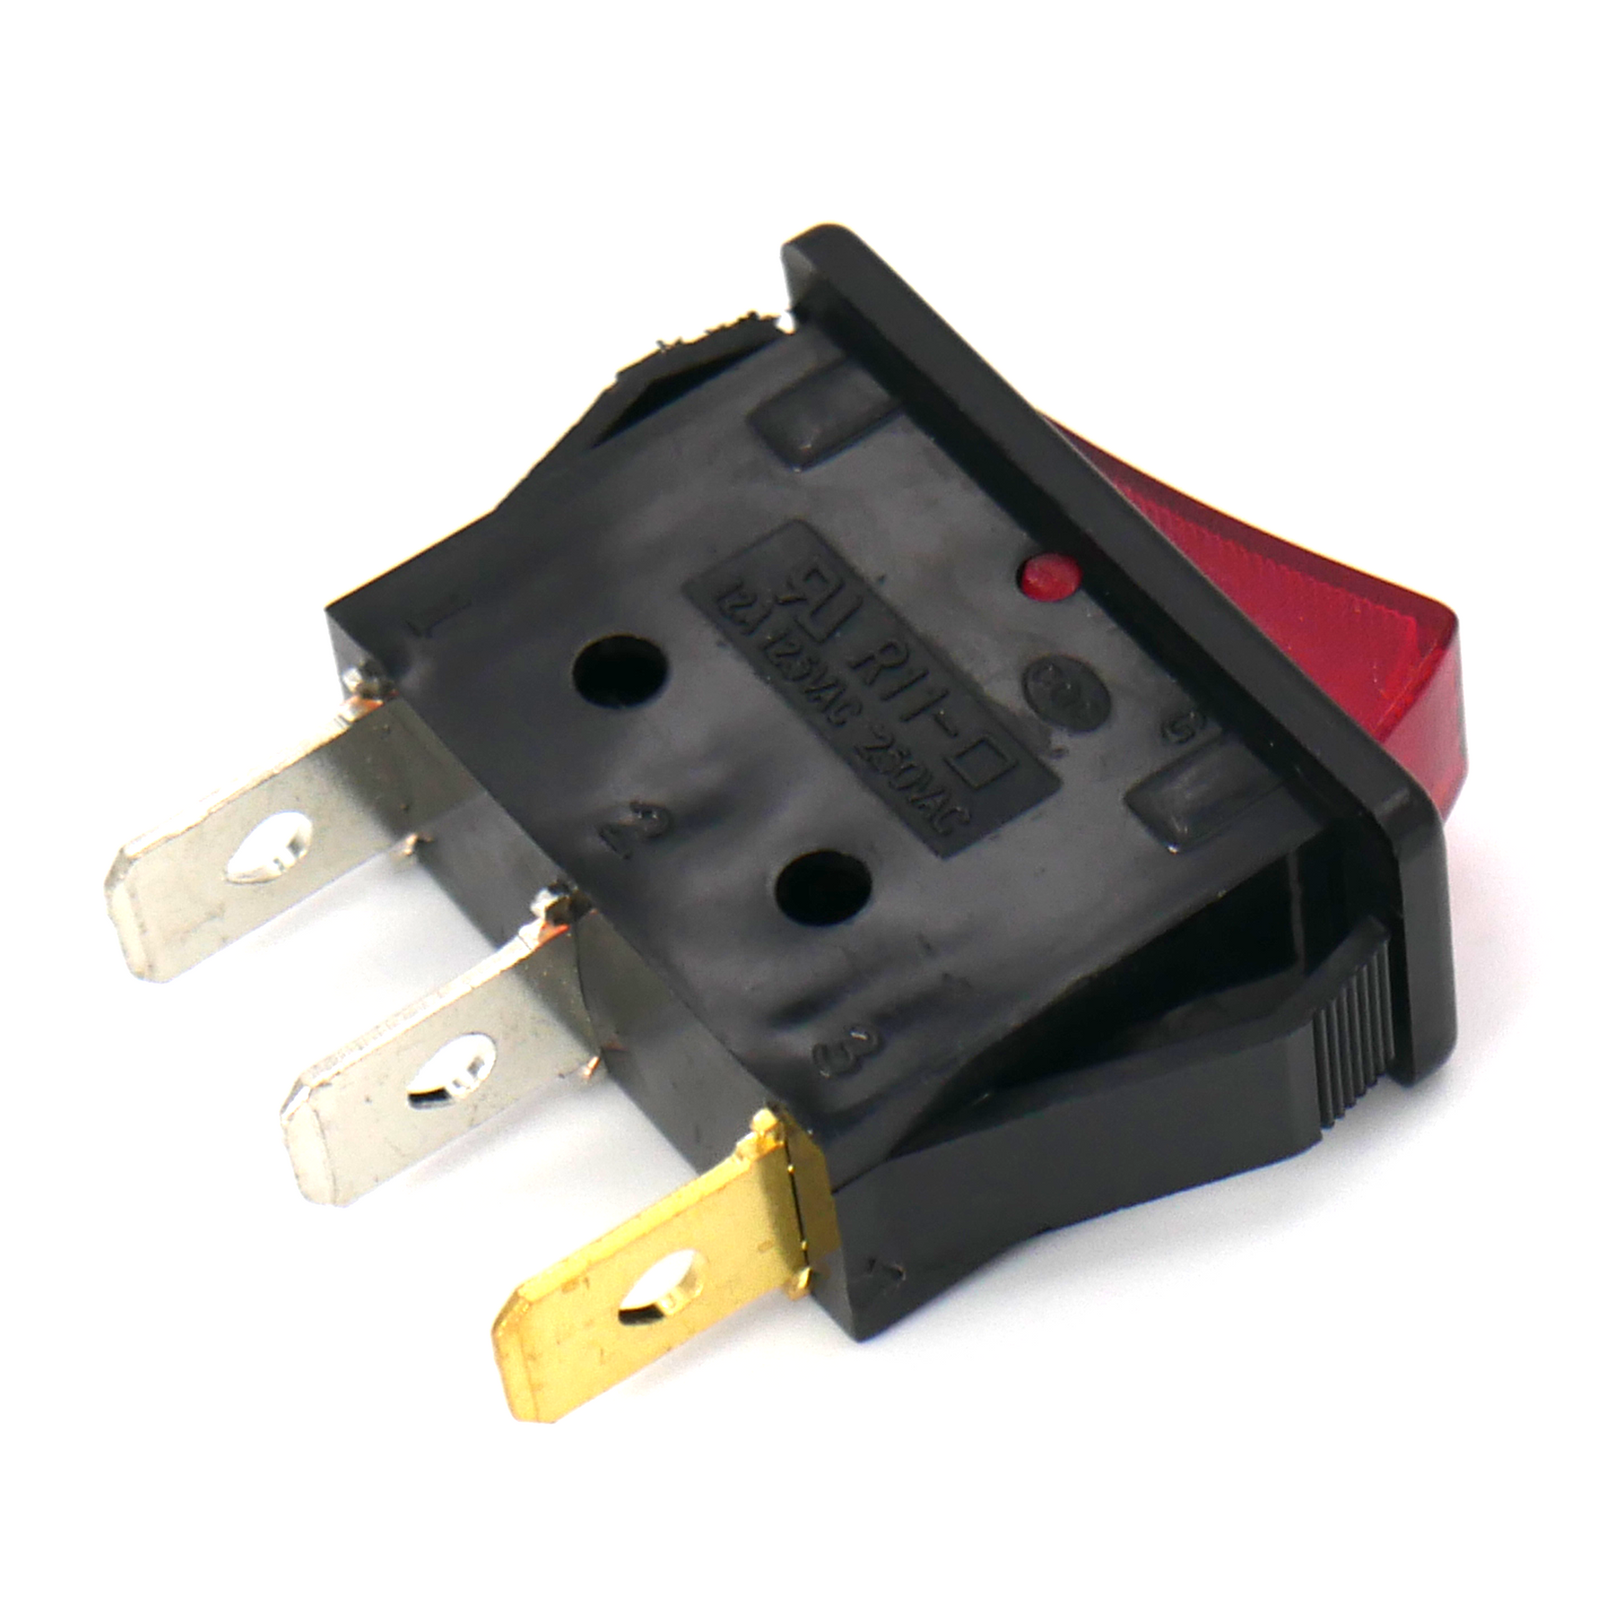 3 pin red rocker on/off switch part for industrial machines